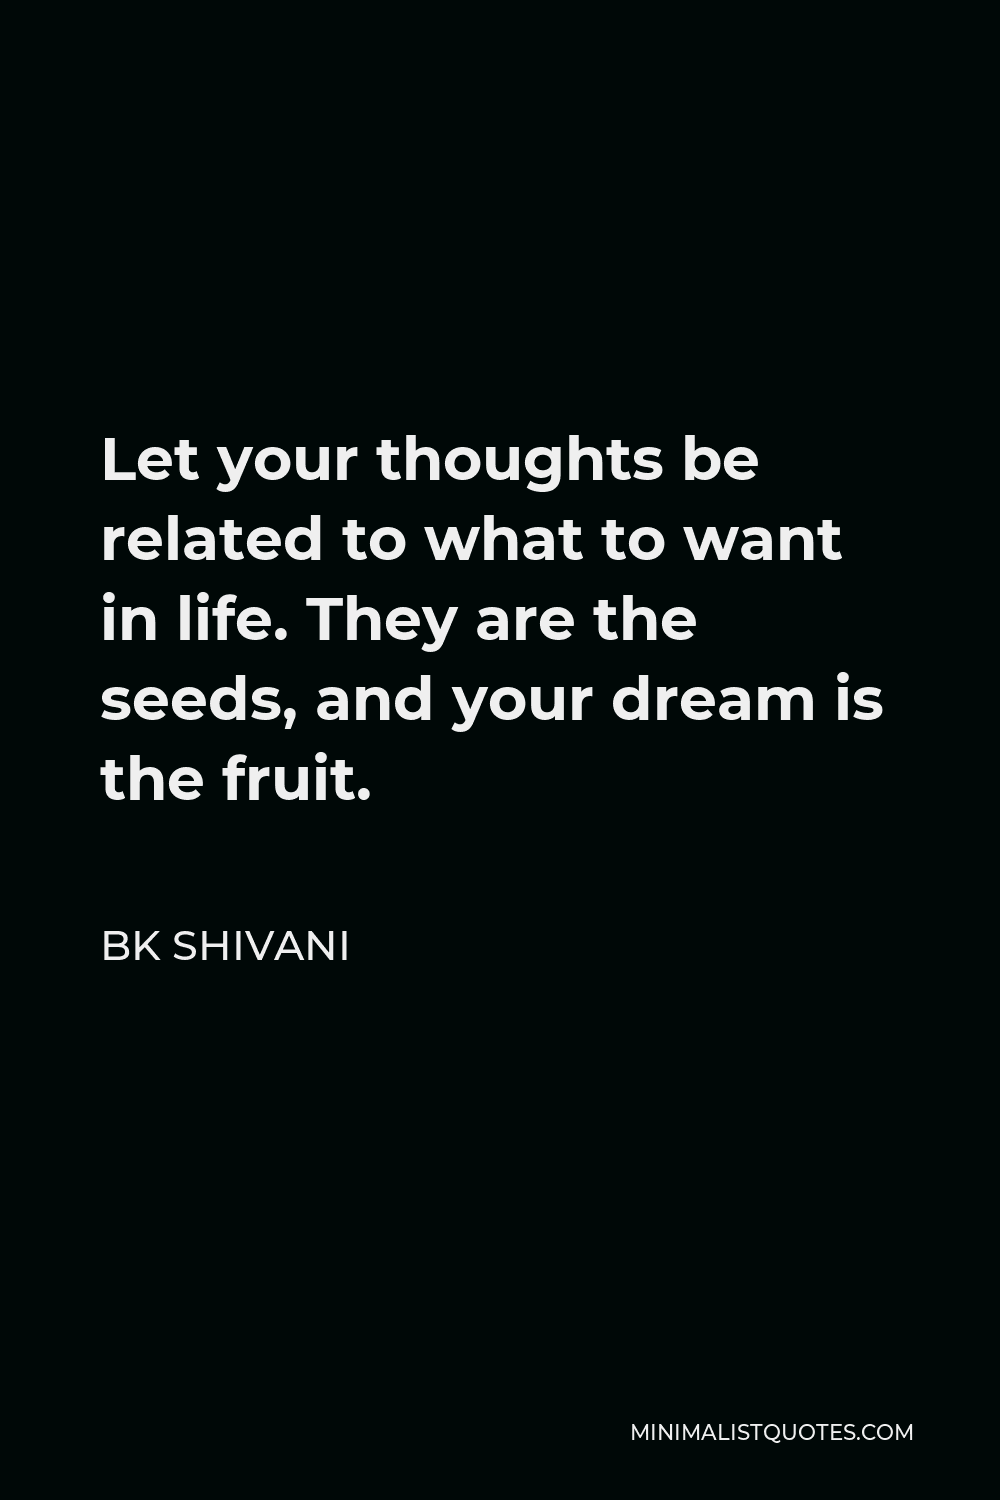 BK Shivani Quote - Let your thoughts be related to what to want in life. They are the seeds, and your dream is the fruit.